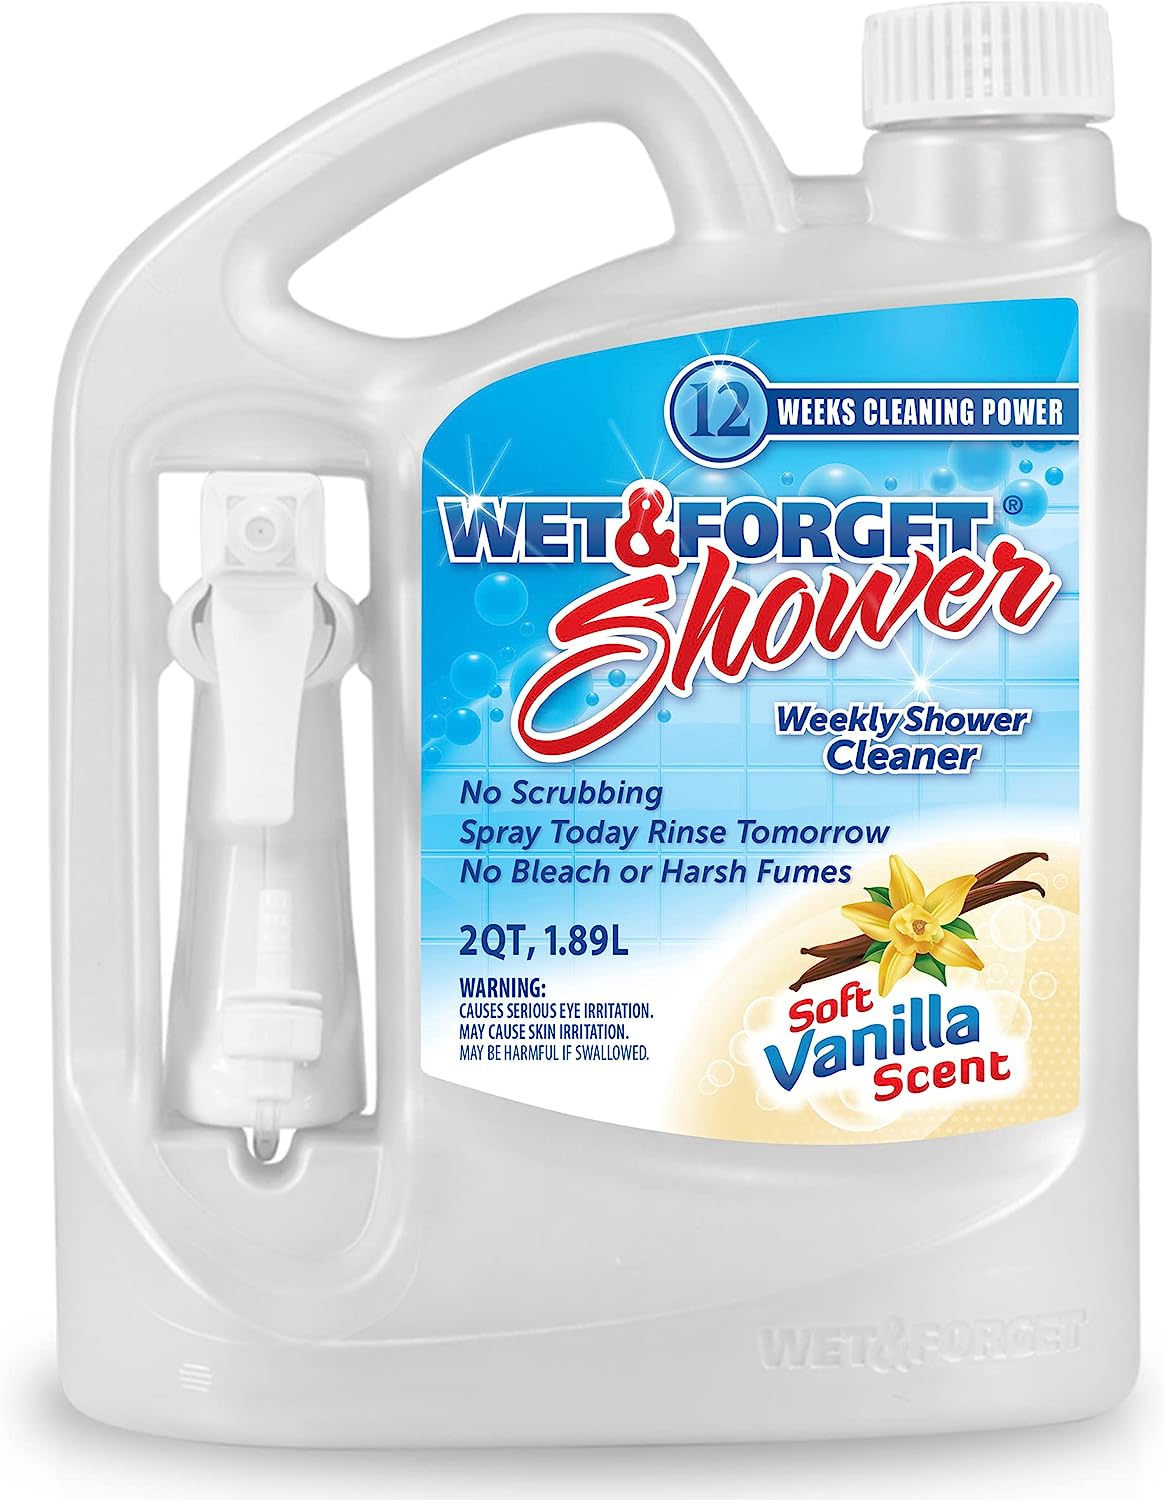 Wet & Forget Shower Cleaner Weekly Application [...]